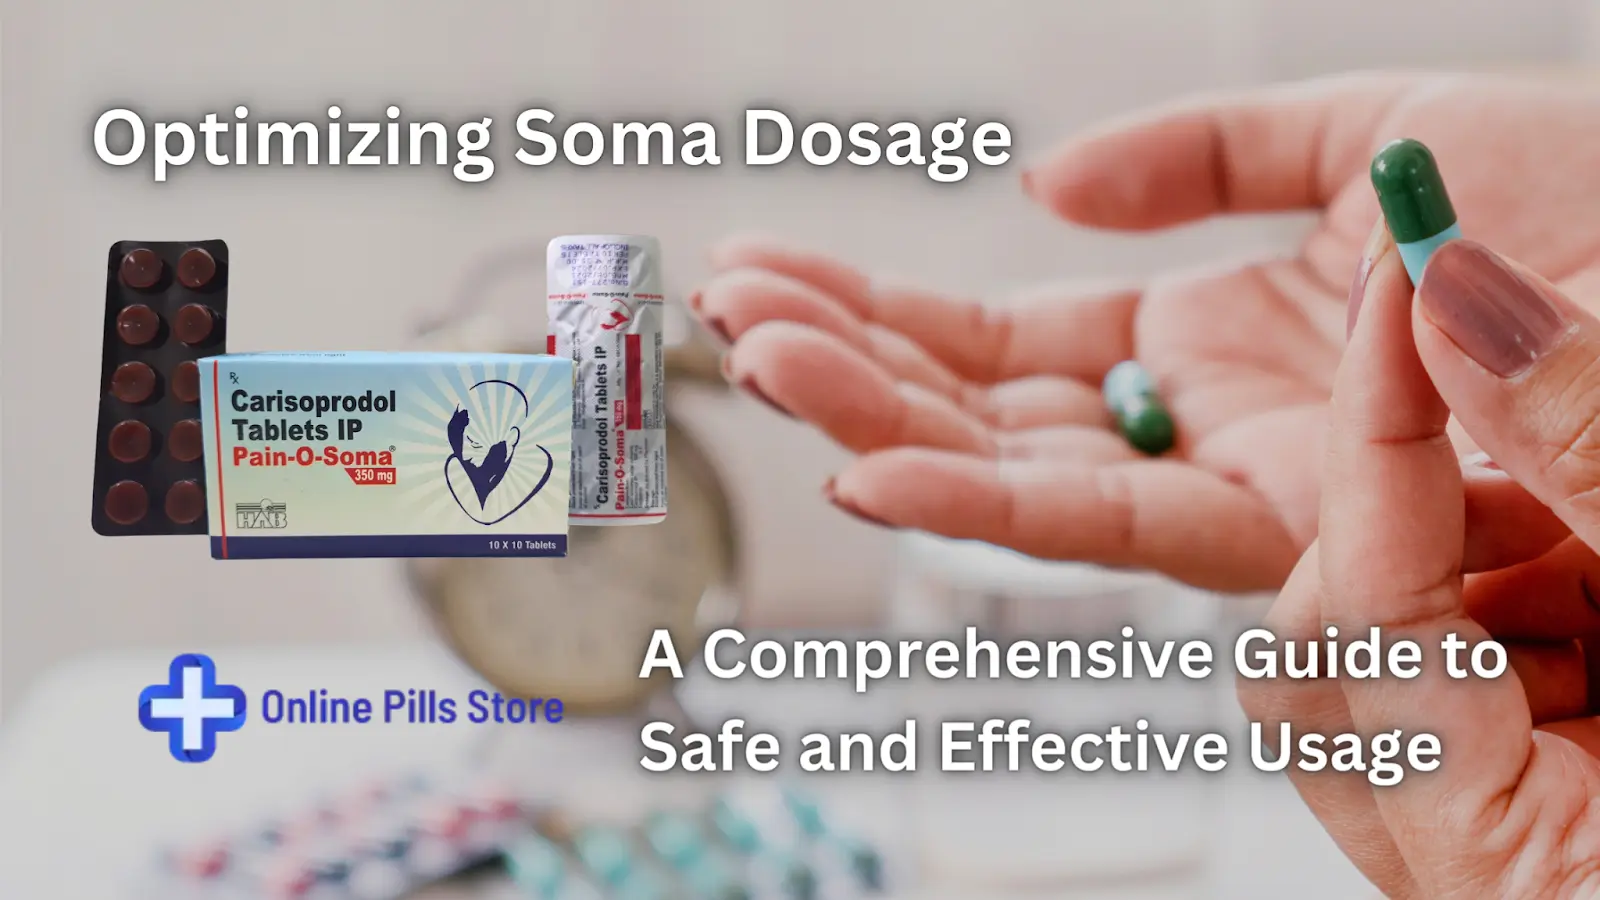 Optimizing Soma Dosage: A Comprehensive Guide to Safe and Effective Usage